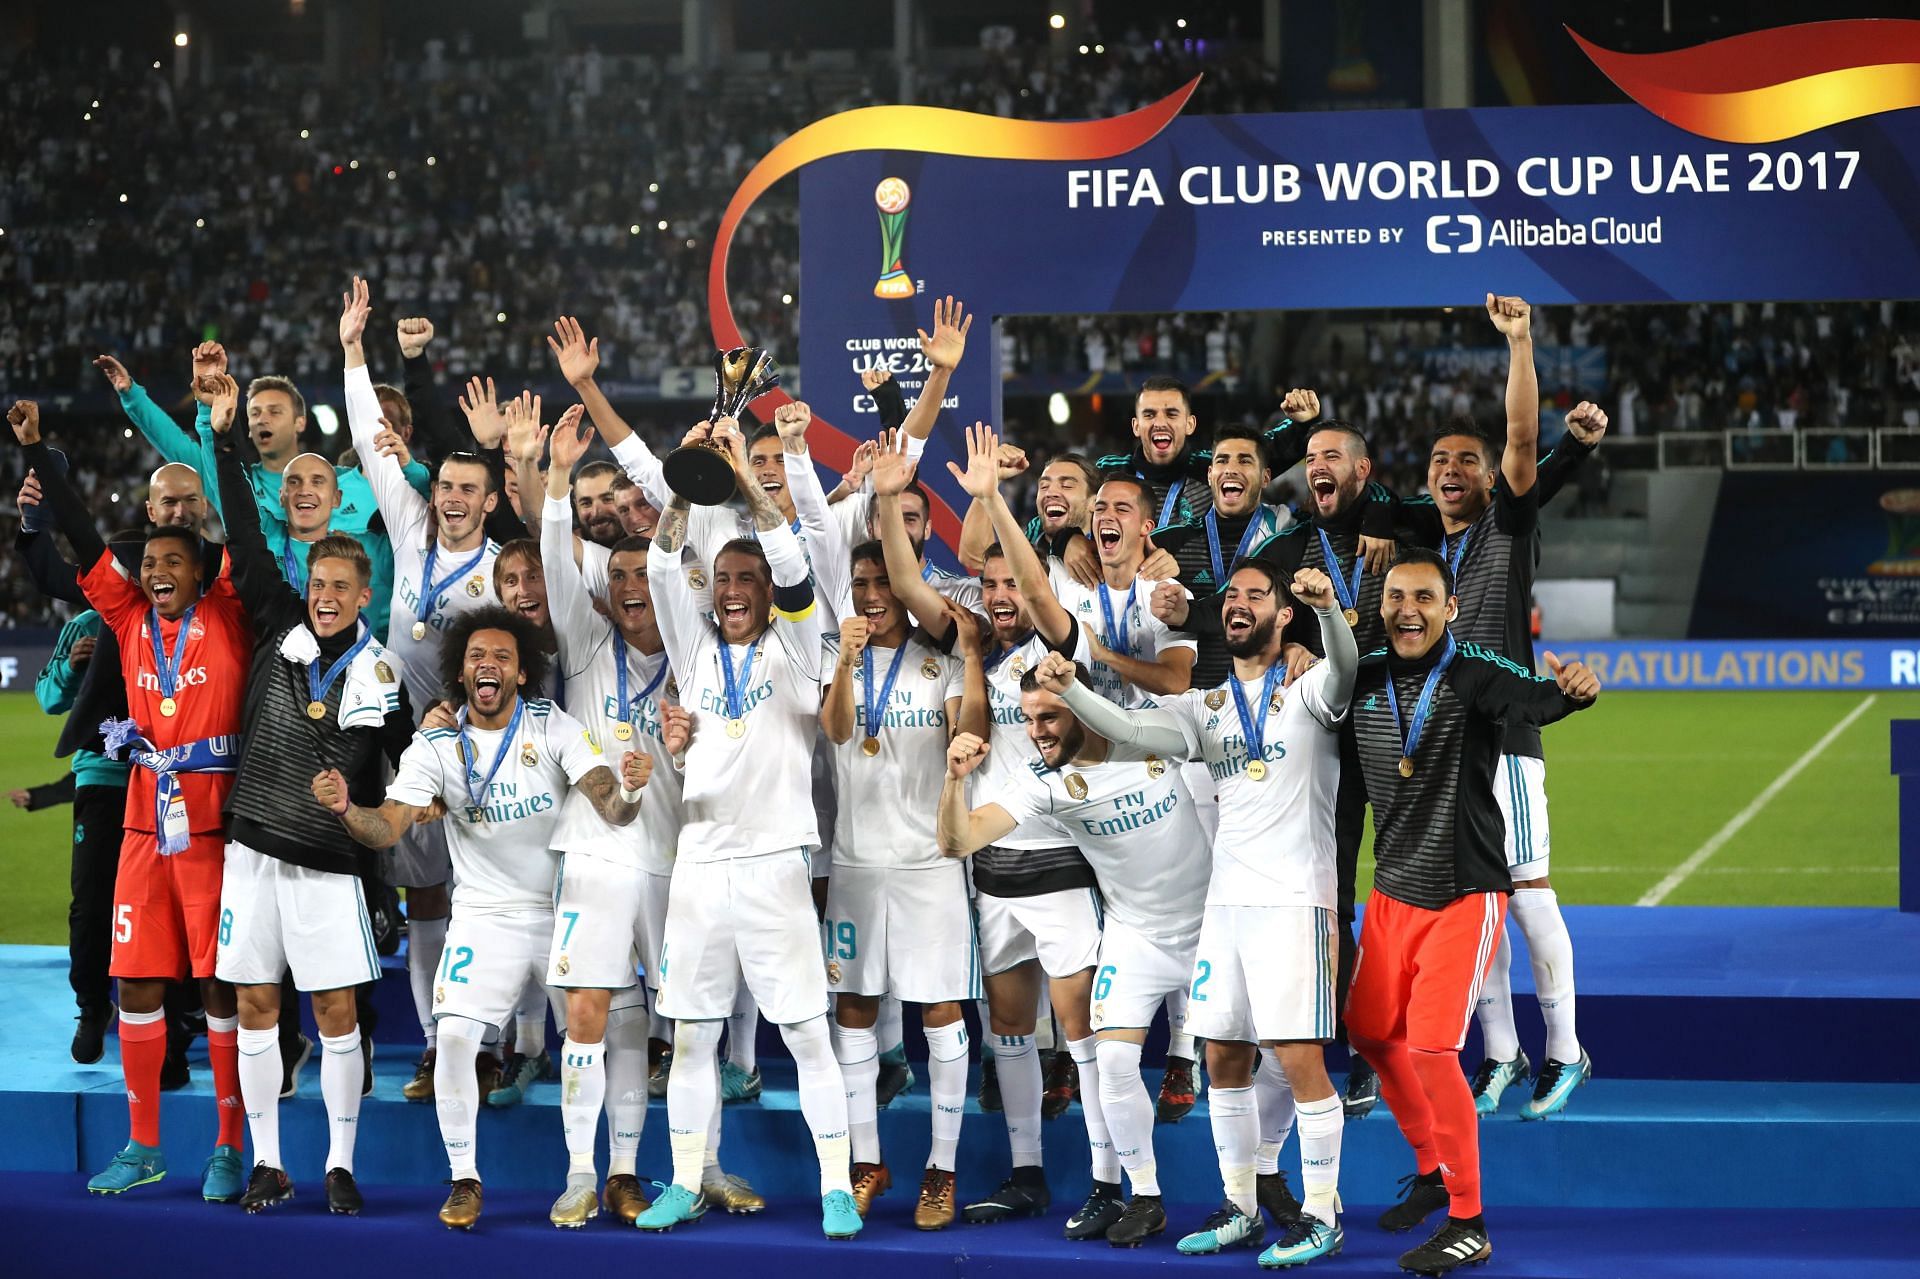 Real Madrid have a 100% record in the finals of the competition